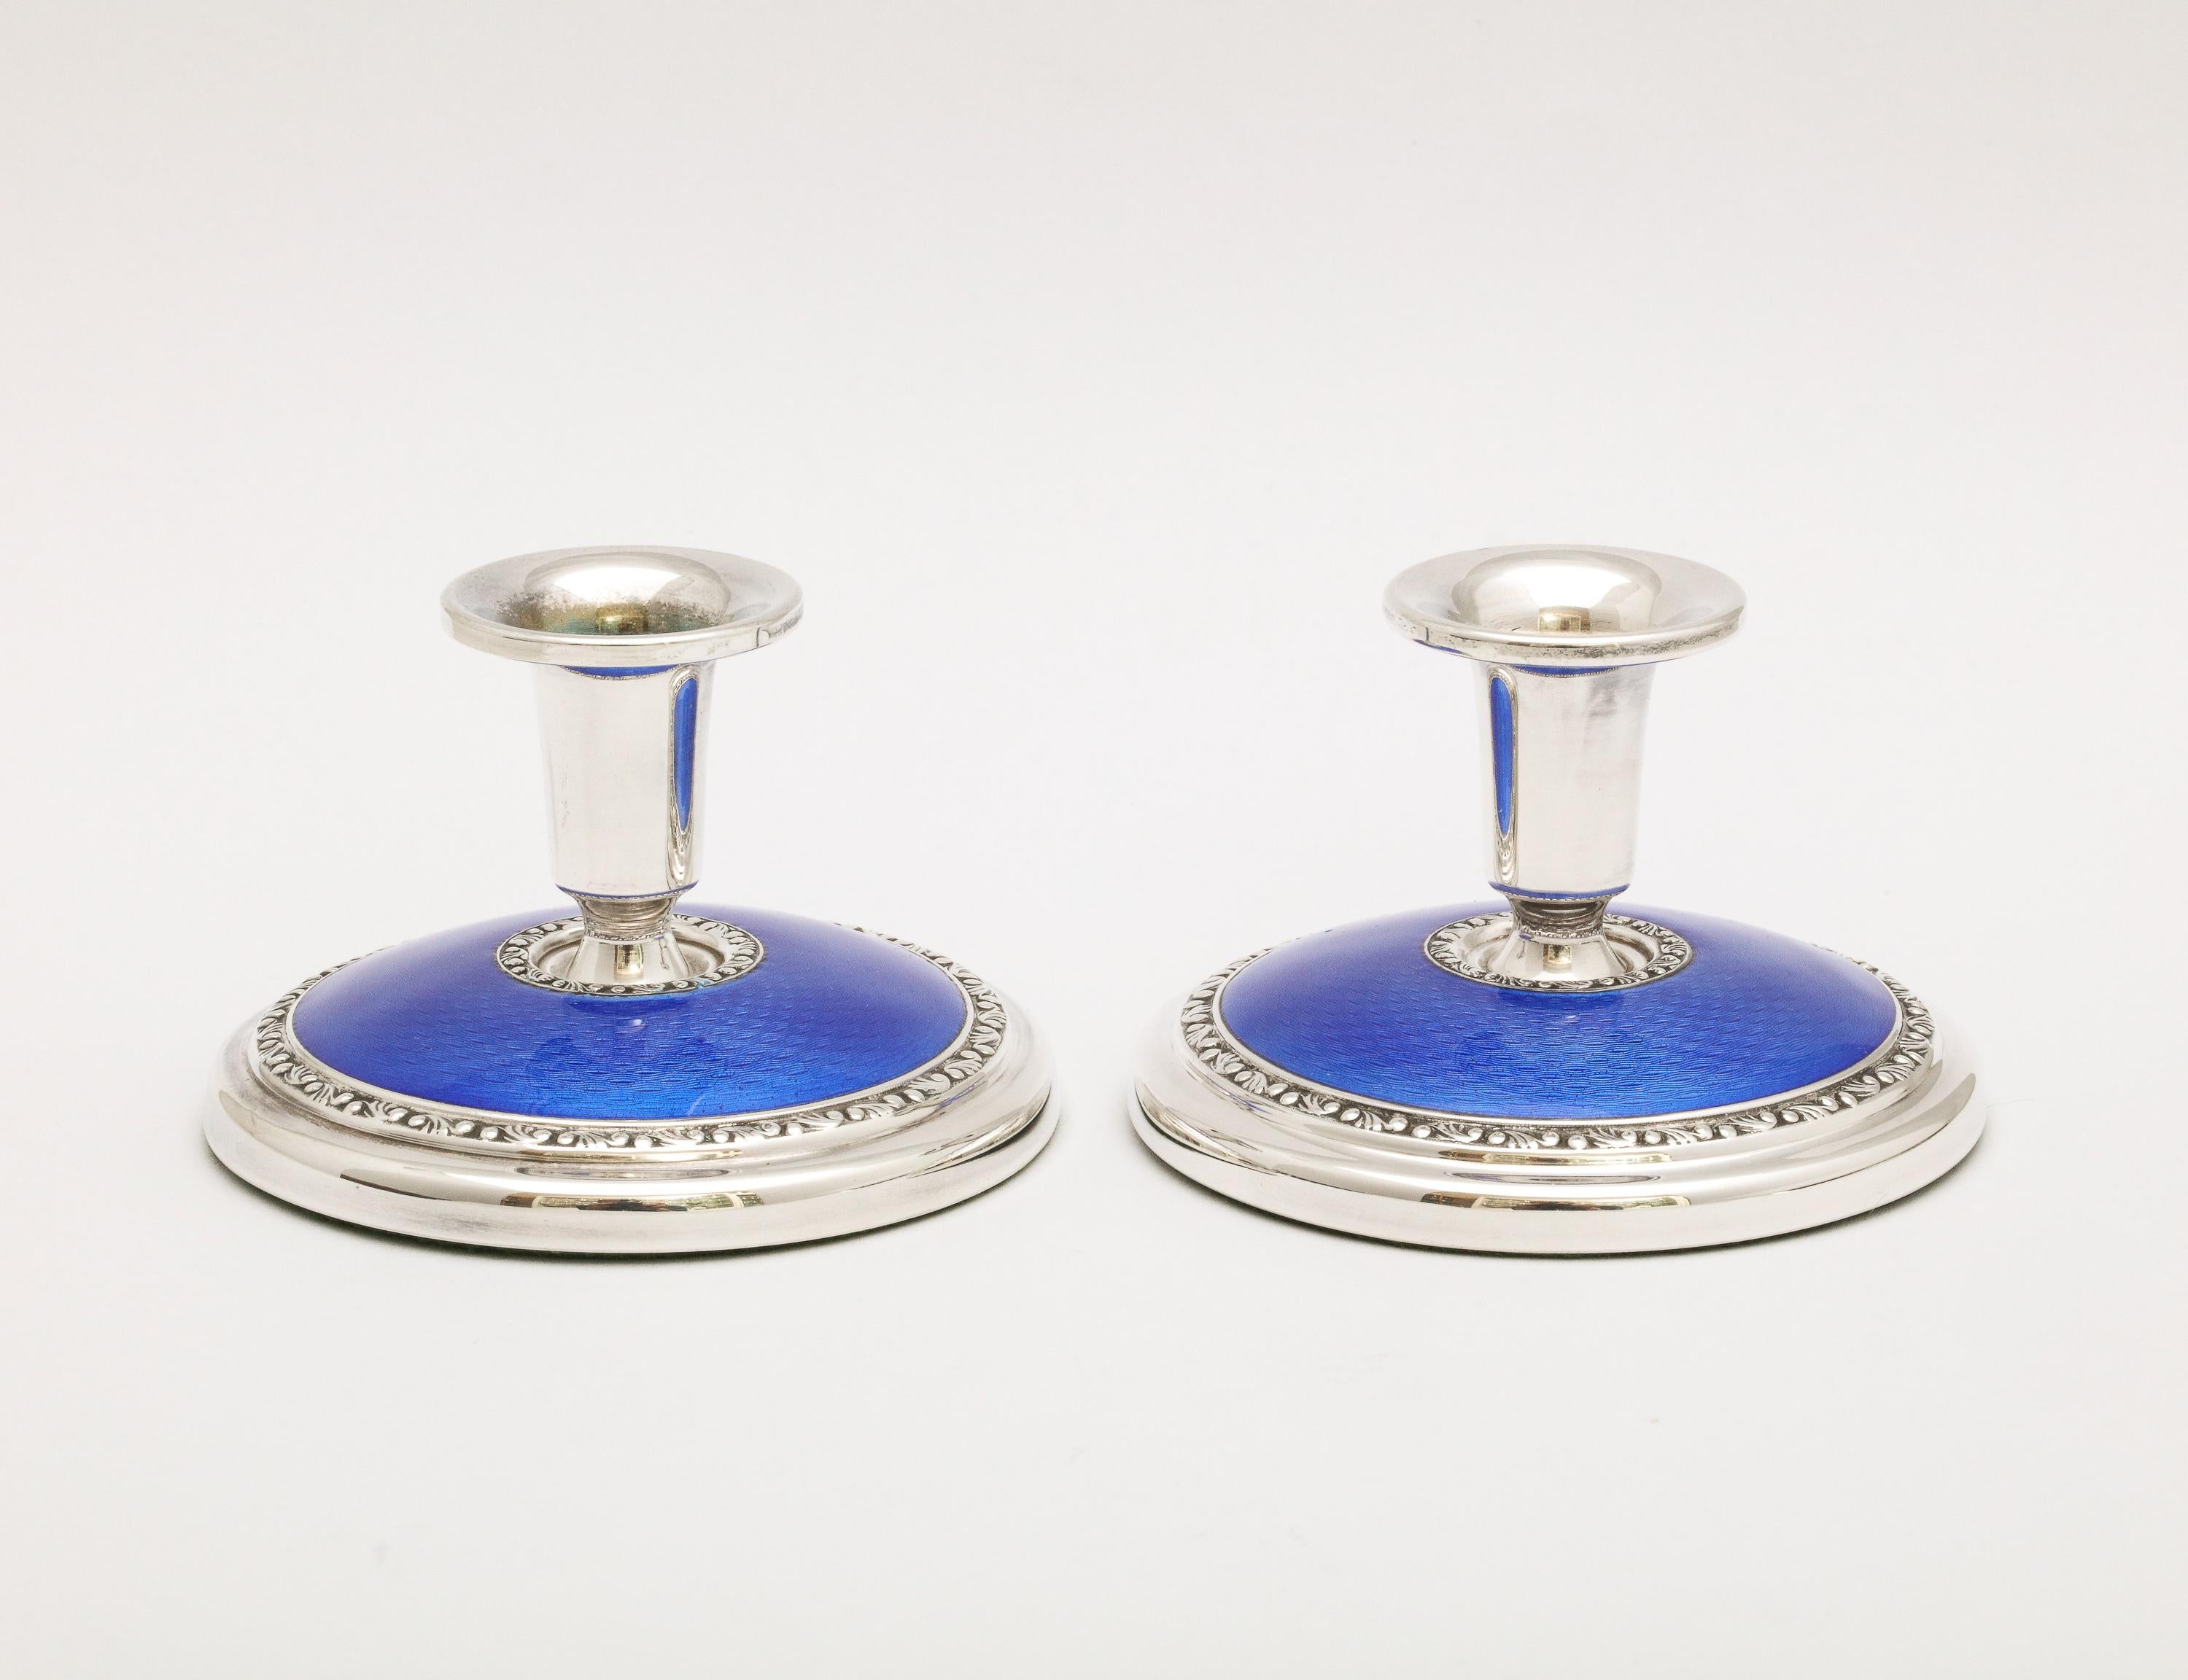 Pair of Art Deco sterling silver and dark blue guilloche enamel candlesticks, Oslo, Norway, Ca. 1930's, Norsk Silwarreindustri - makers. Each candlestick measures 2 inches high x 2 3/4 inches diameter. Weighted bases. Underside of each base is